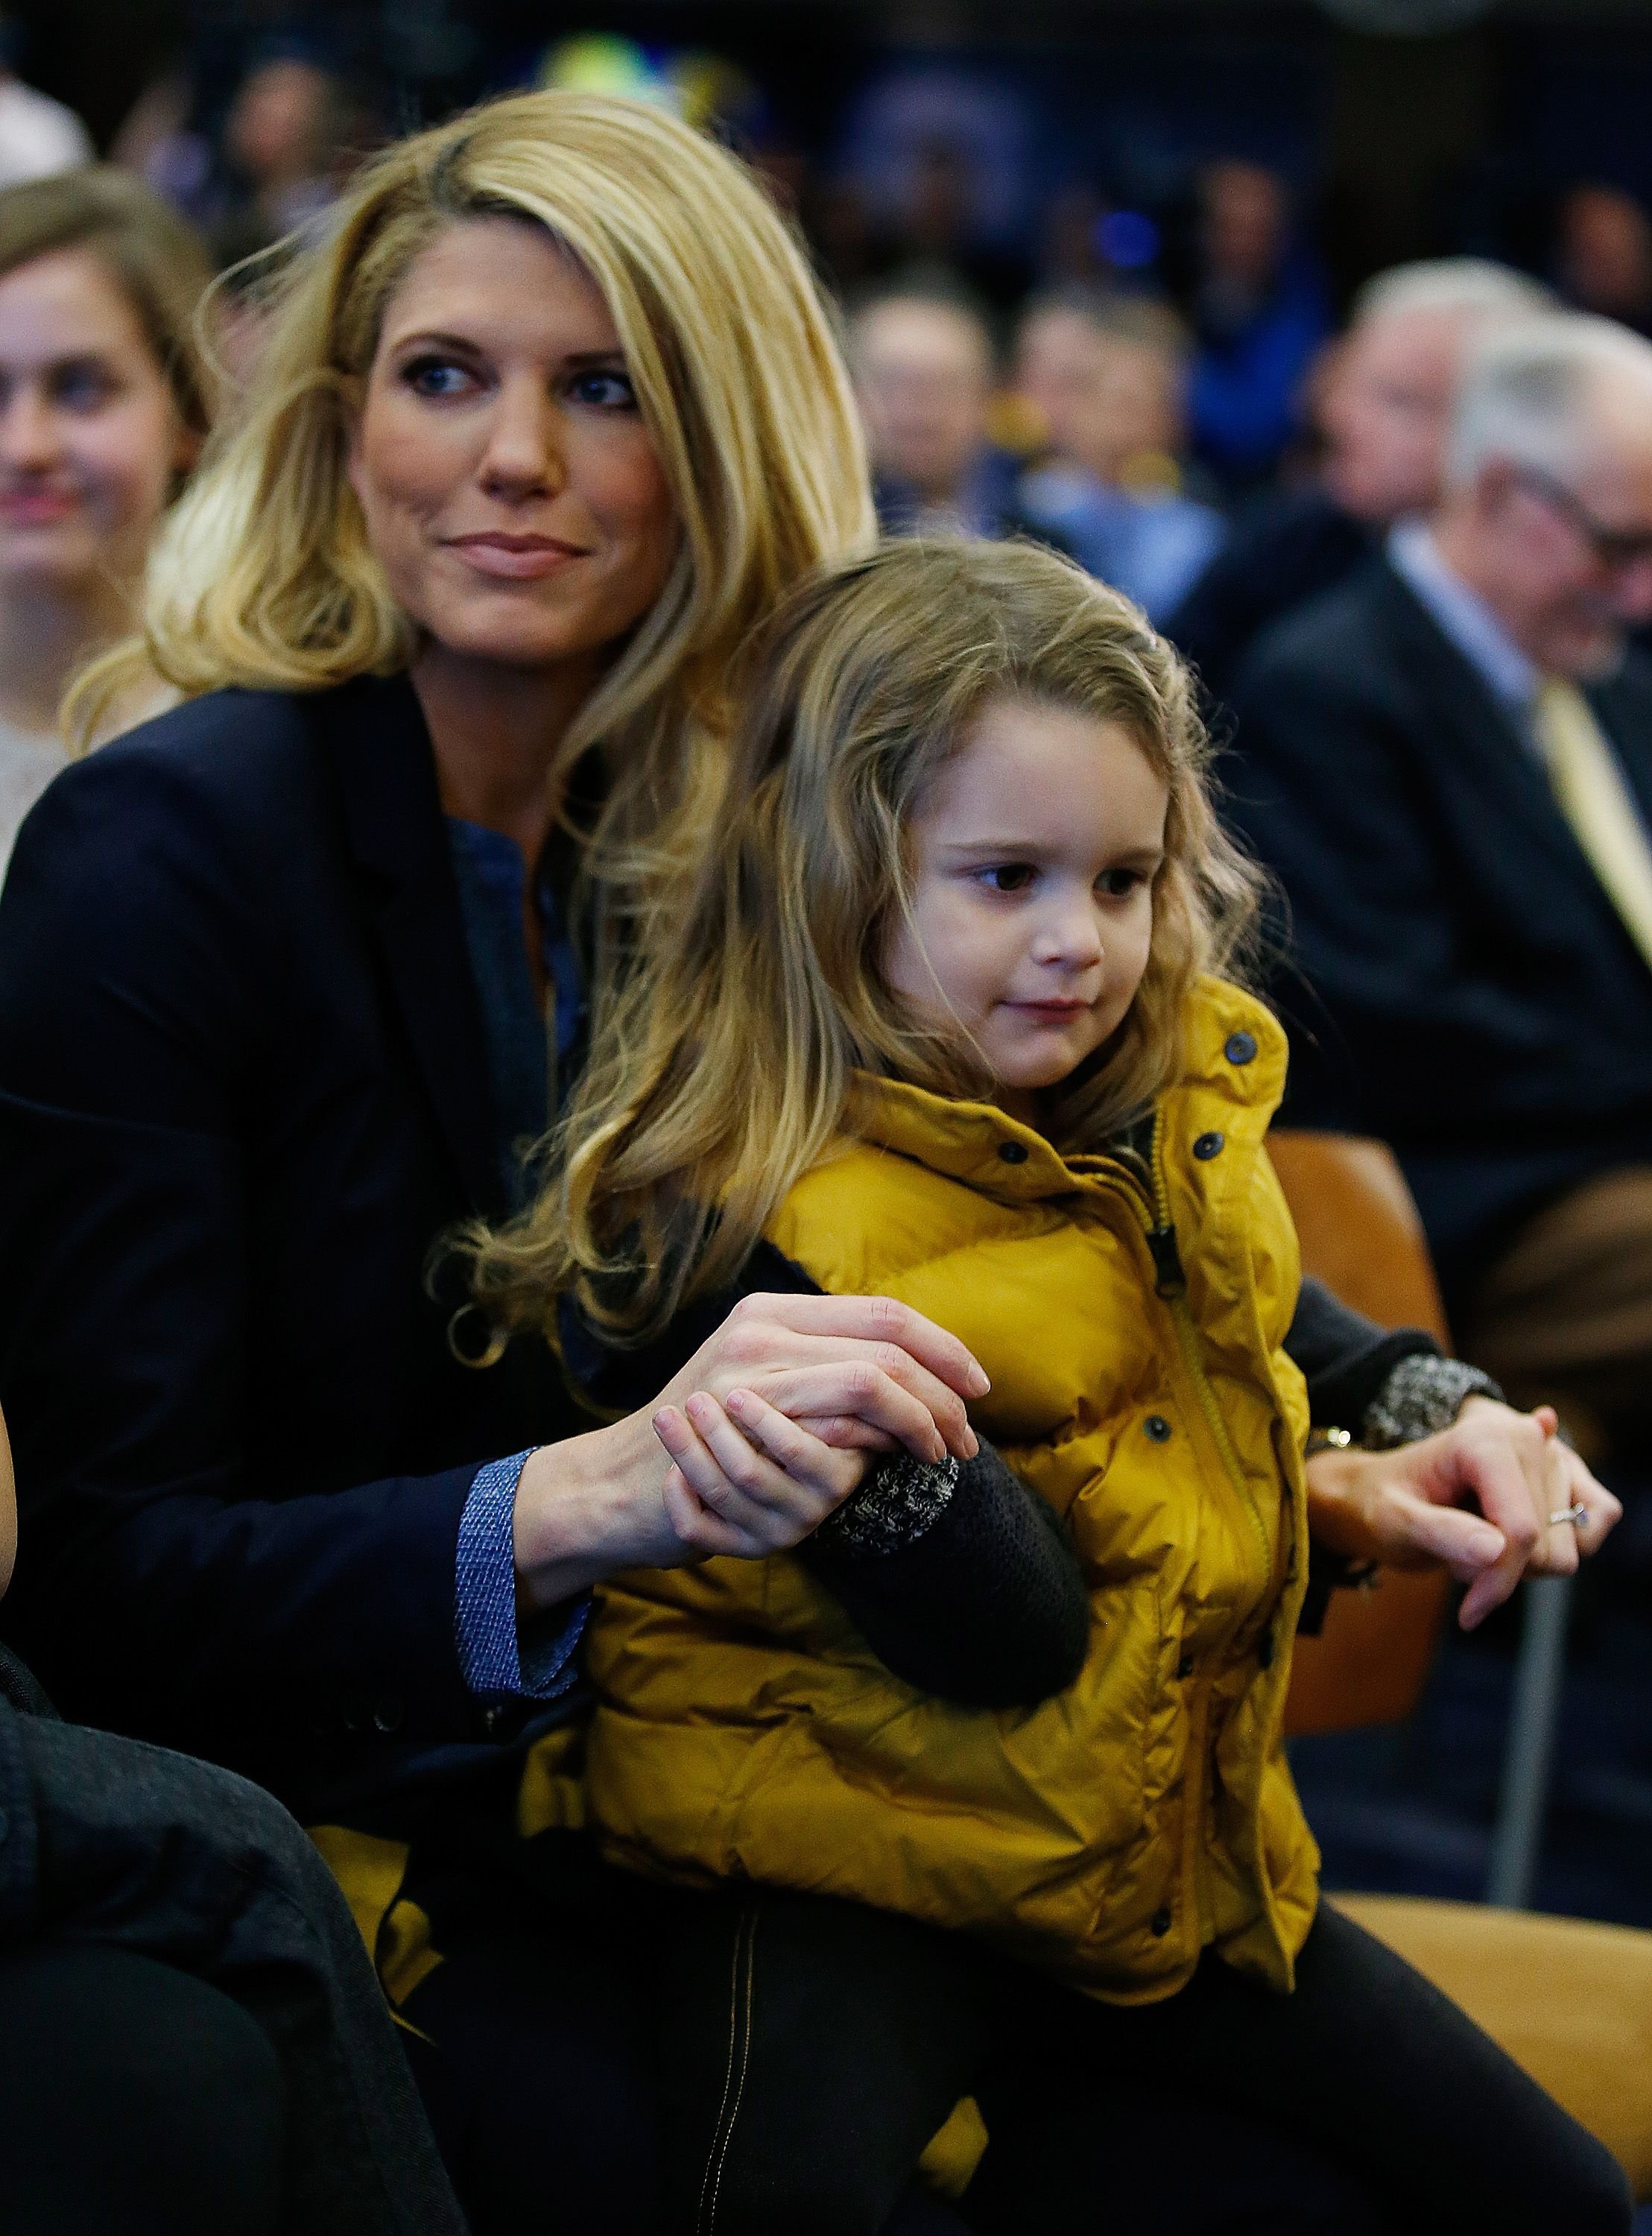 Sarah Harbaugh and Katherine Harbaugh at the Junge Family Champions Center on December 30, 2014, in Ann Arbor, Michigan. | Source: Getty Images